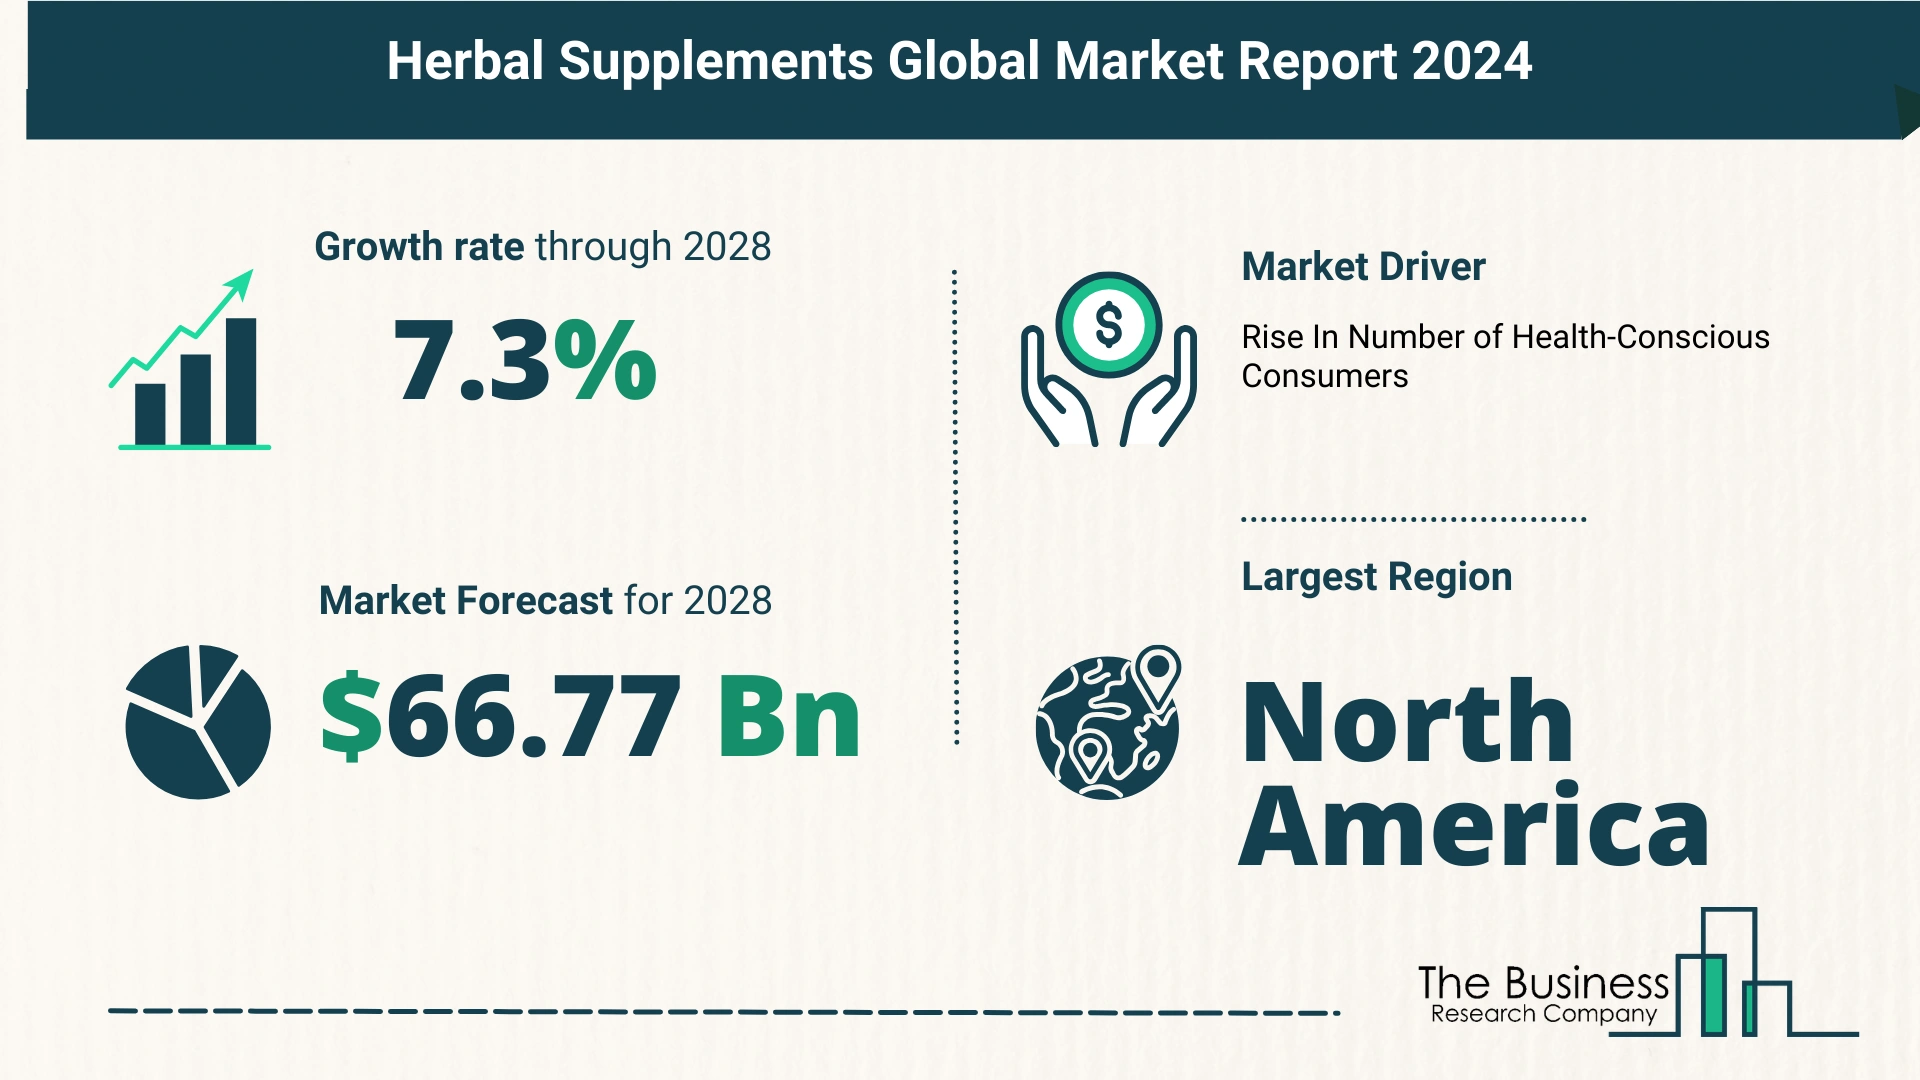 Key Trends And Drivers In The Herbal Supplements Market 2024